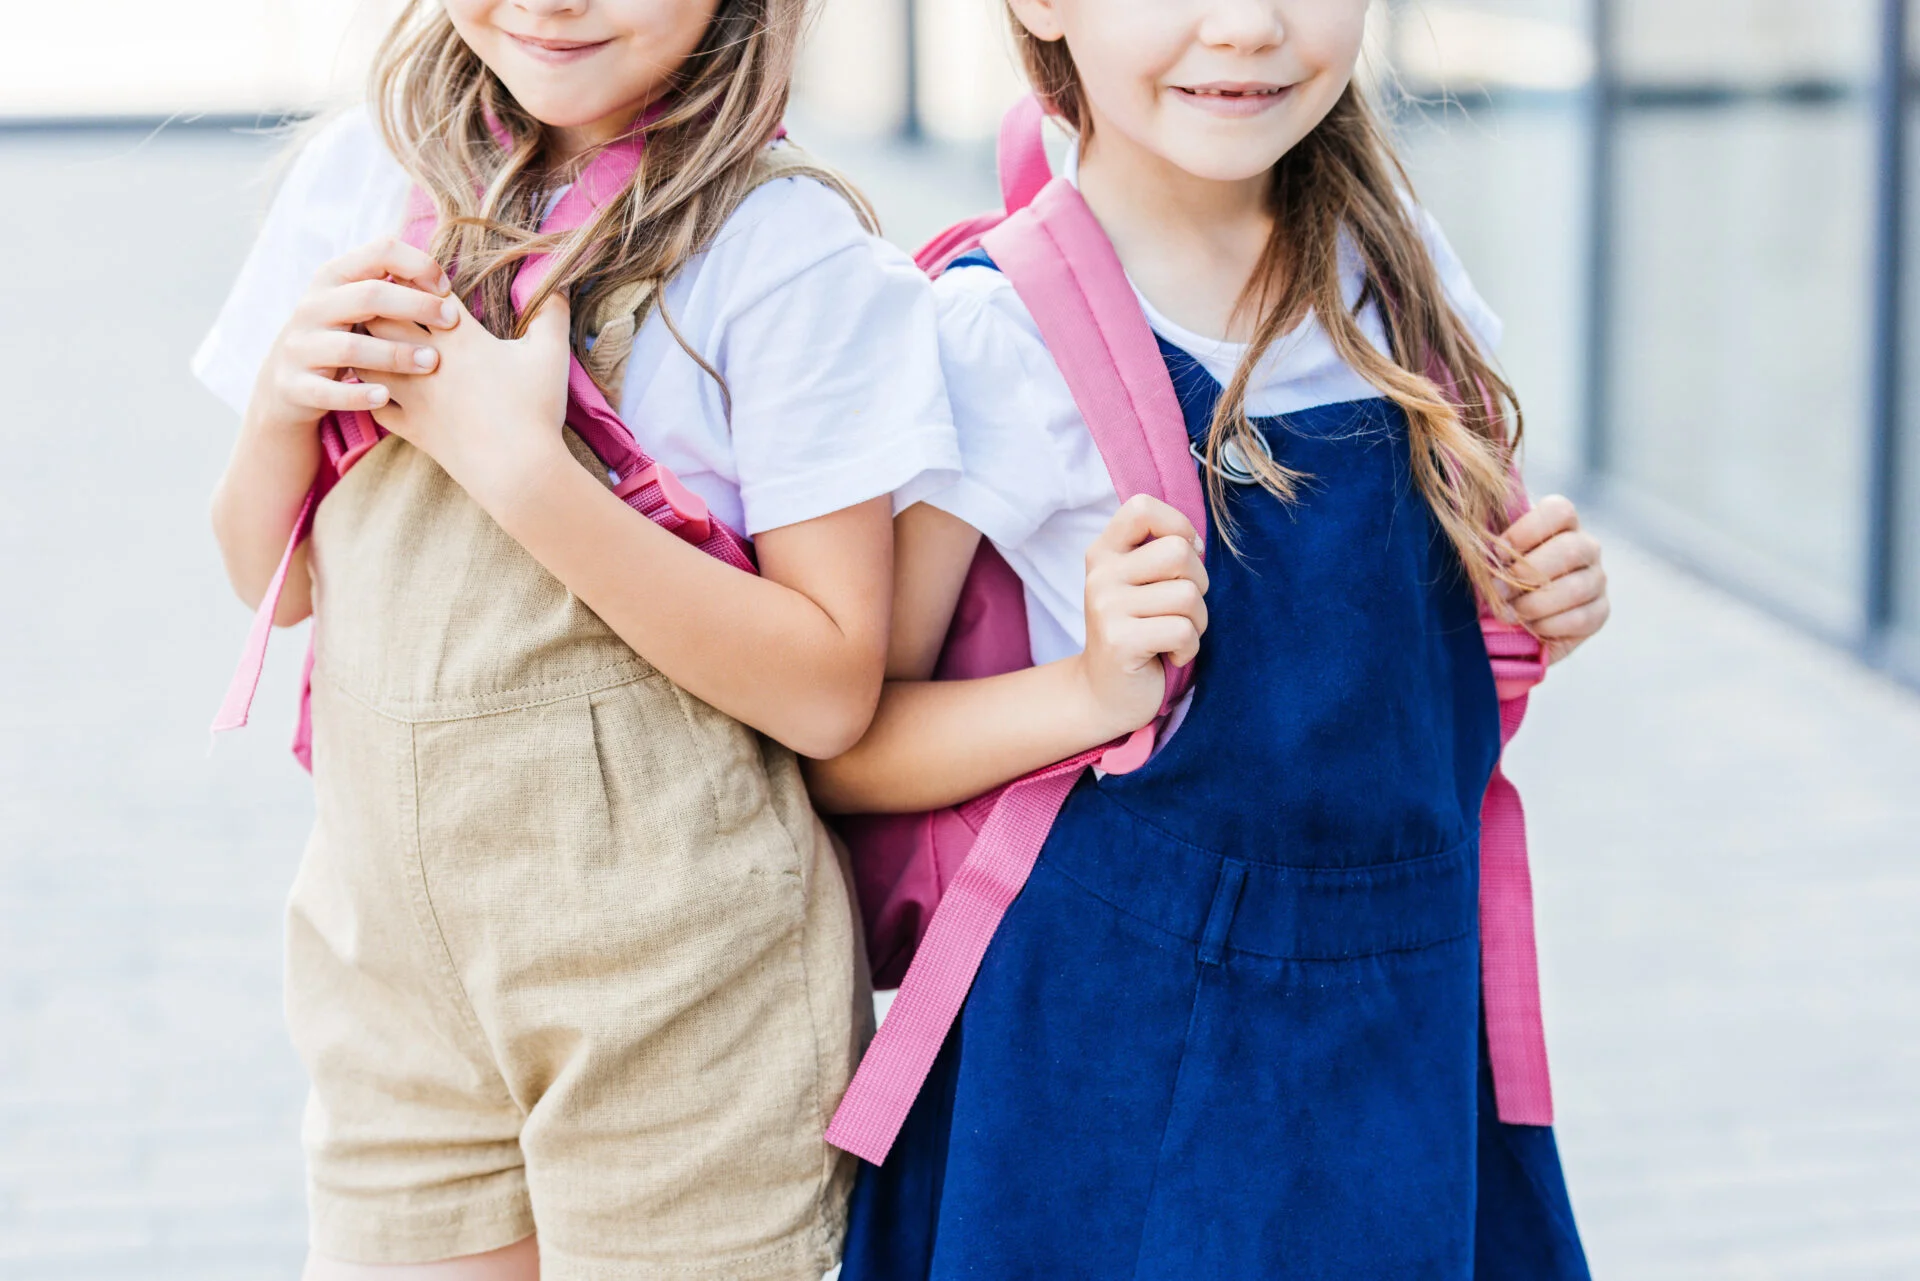 Two girls wearing pink backpacks with no indications of PFAS "forever chemicals" on the fabric